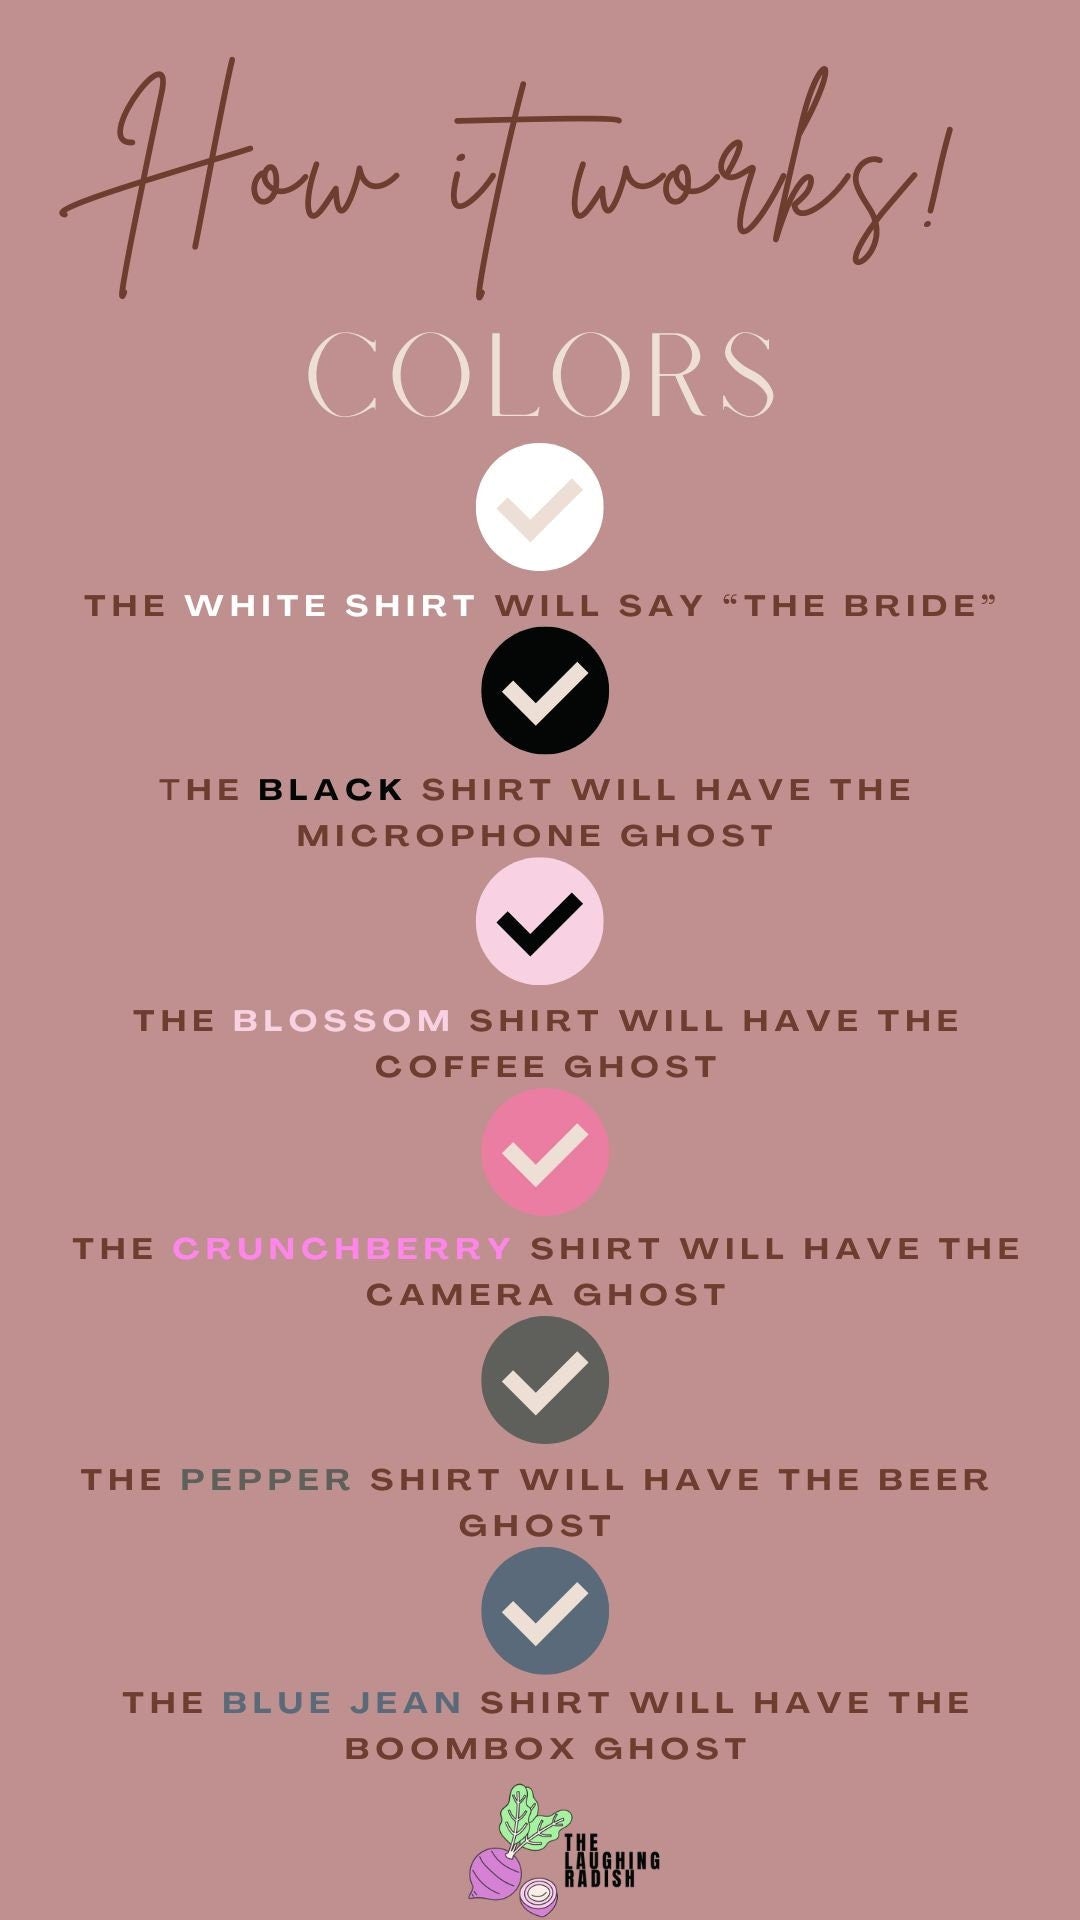 A color guide matching colors with shirt text options.